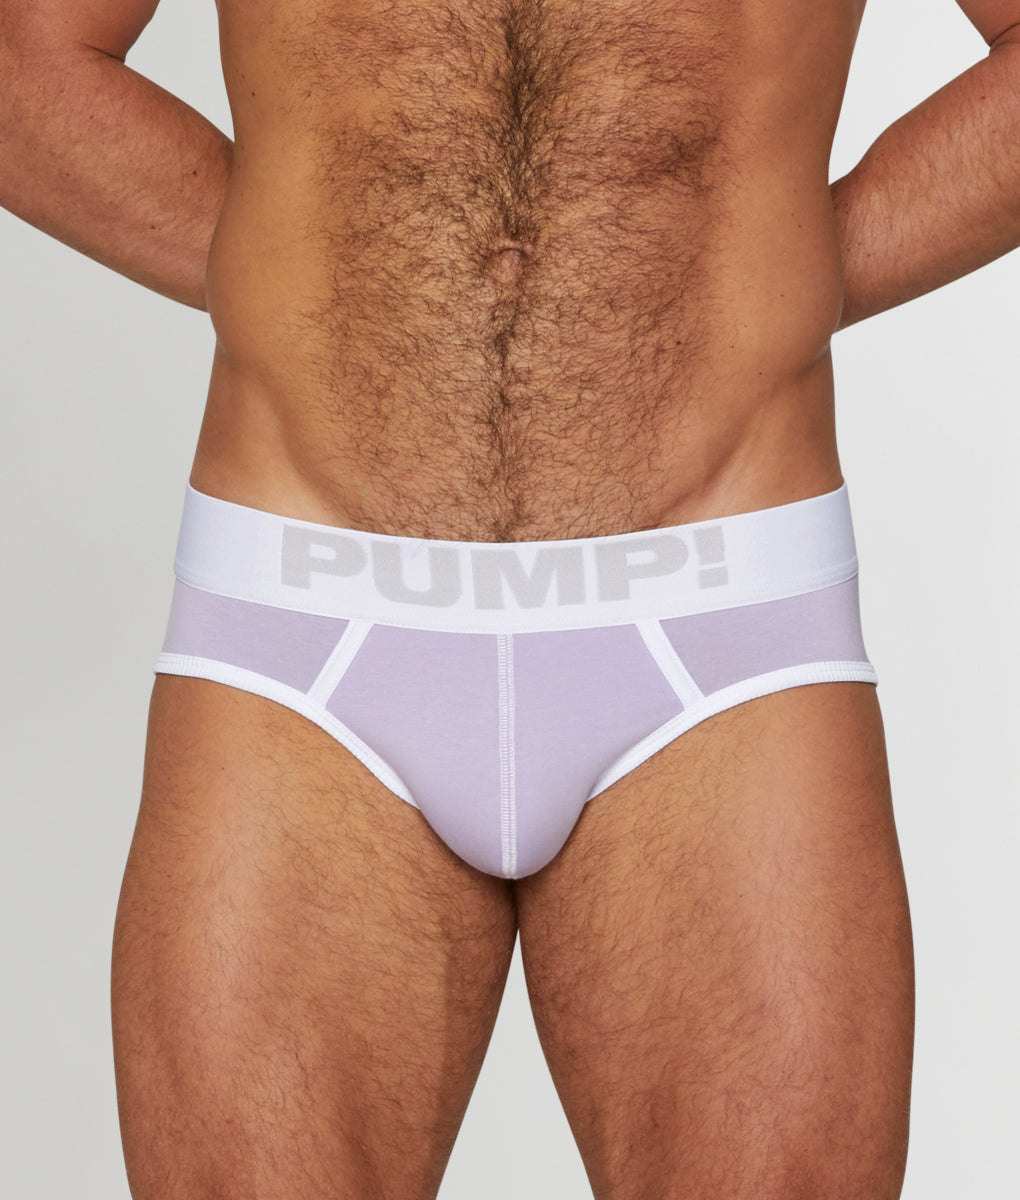 Discover and Shop: PUMP! Underwear